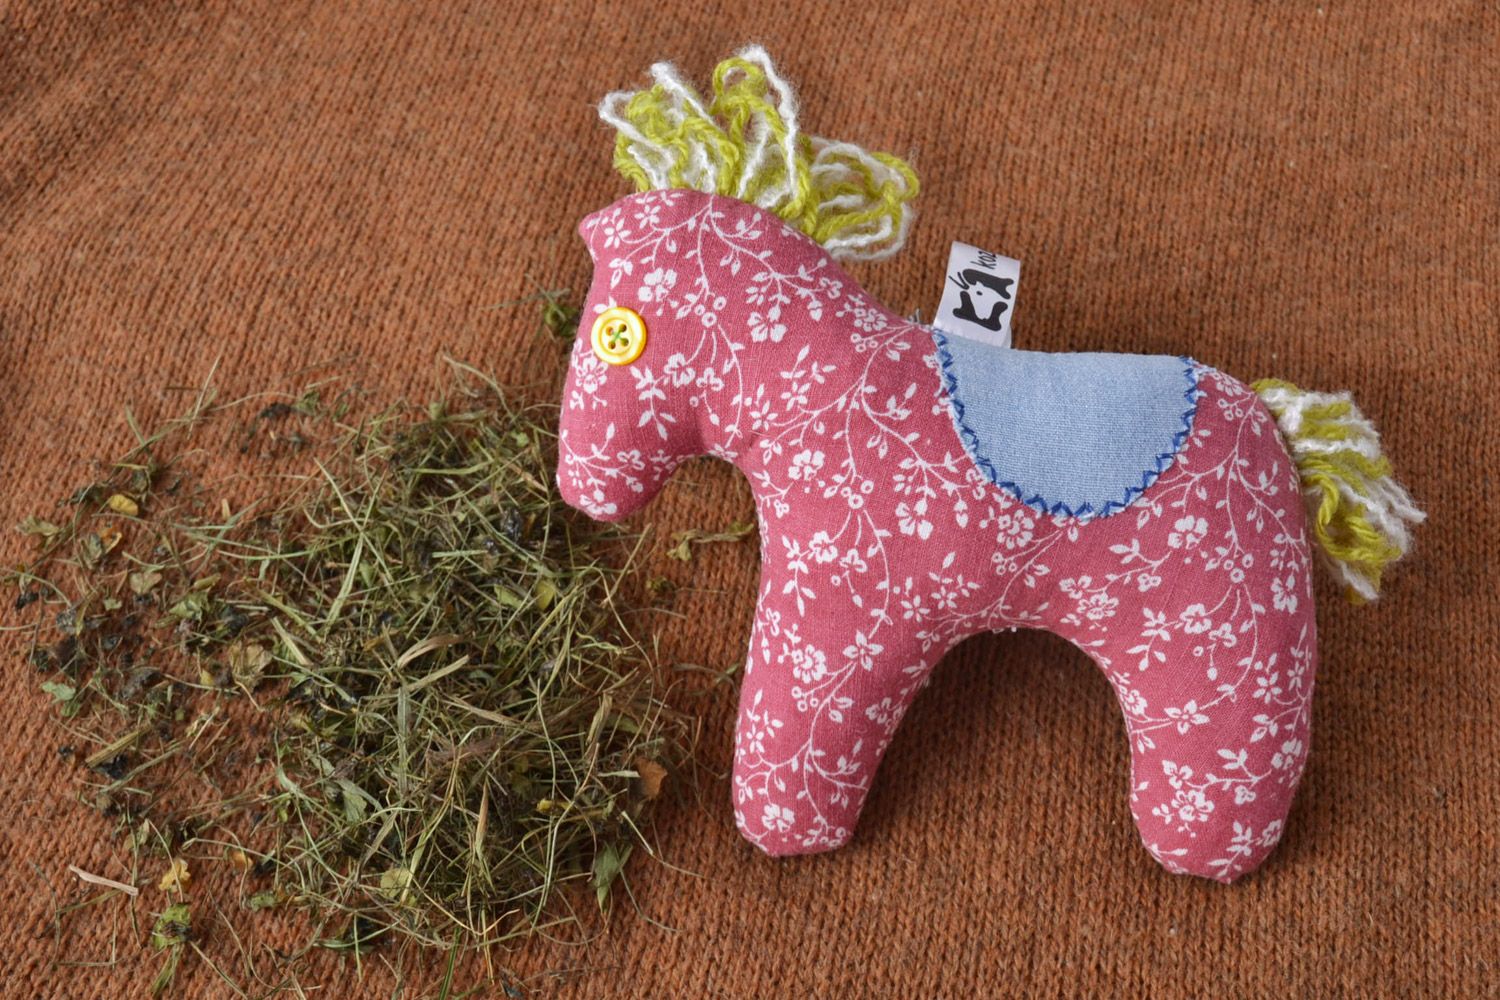 Handmade small soft toy sewn of bright pink patterned fabric horse for baby girl photo 1